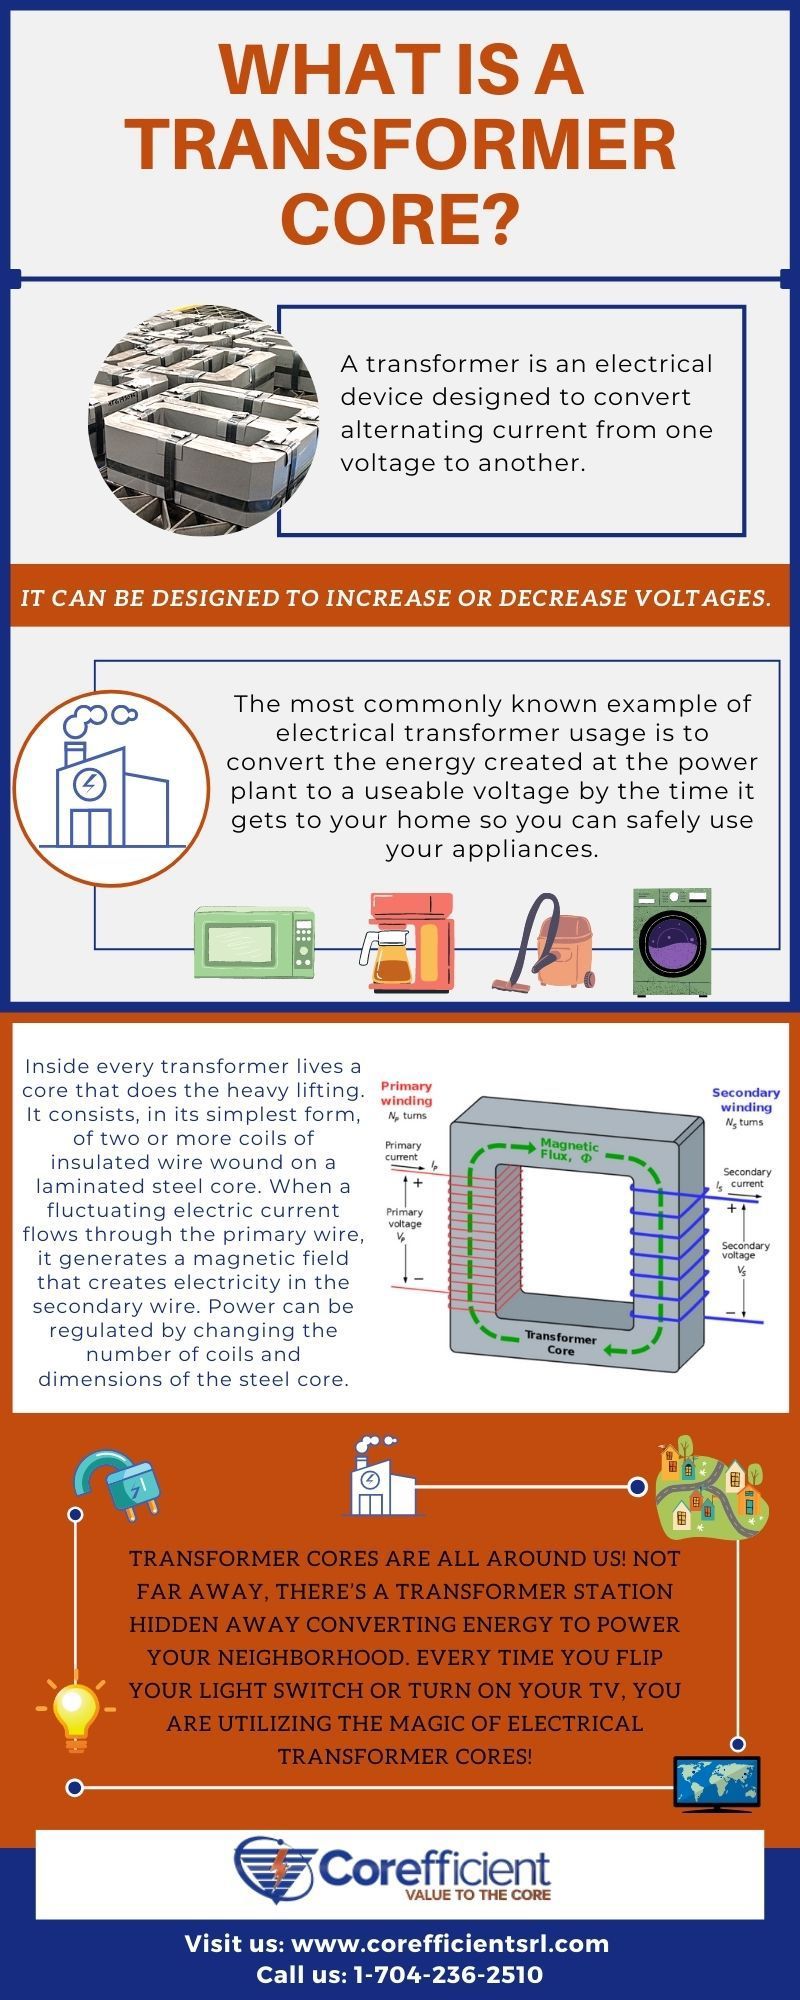 nfographic using Corefficient’s signature bright orange and blue base colors, answering the question, “what is a transformer core?” using highlights from the corresponding article.